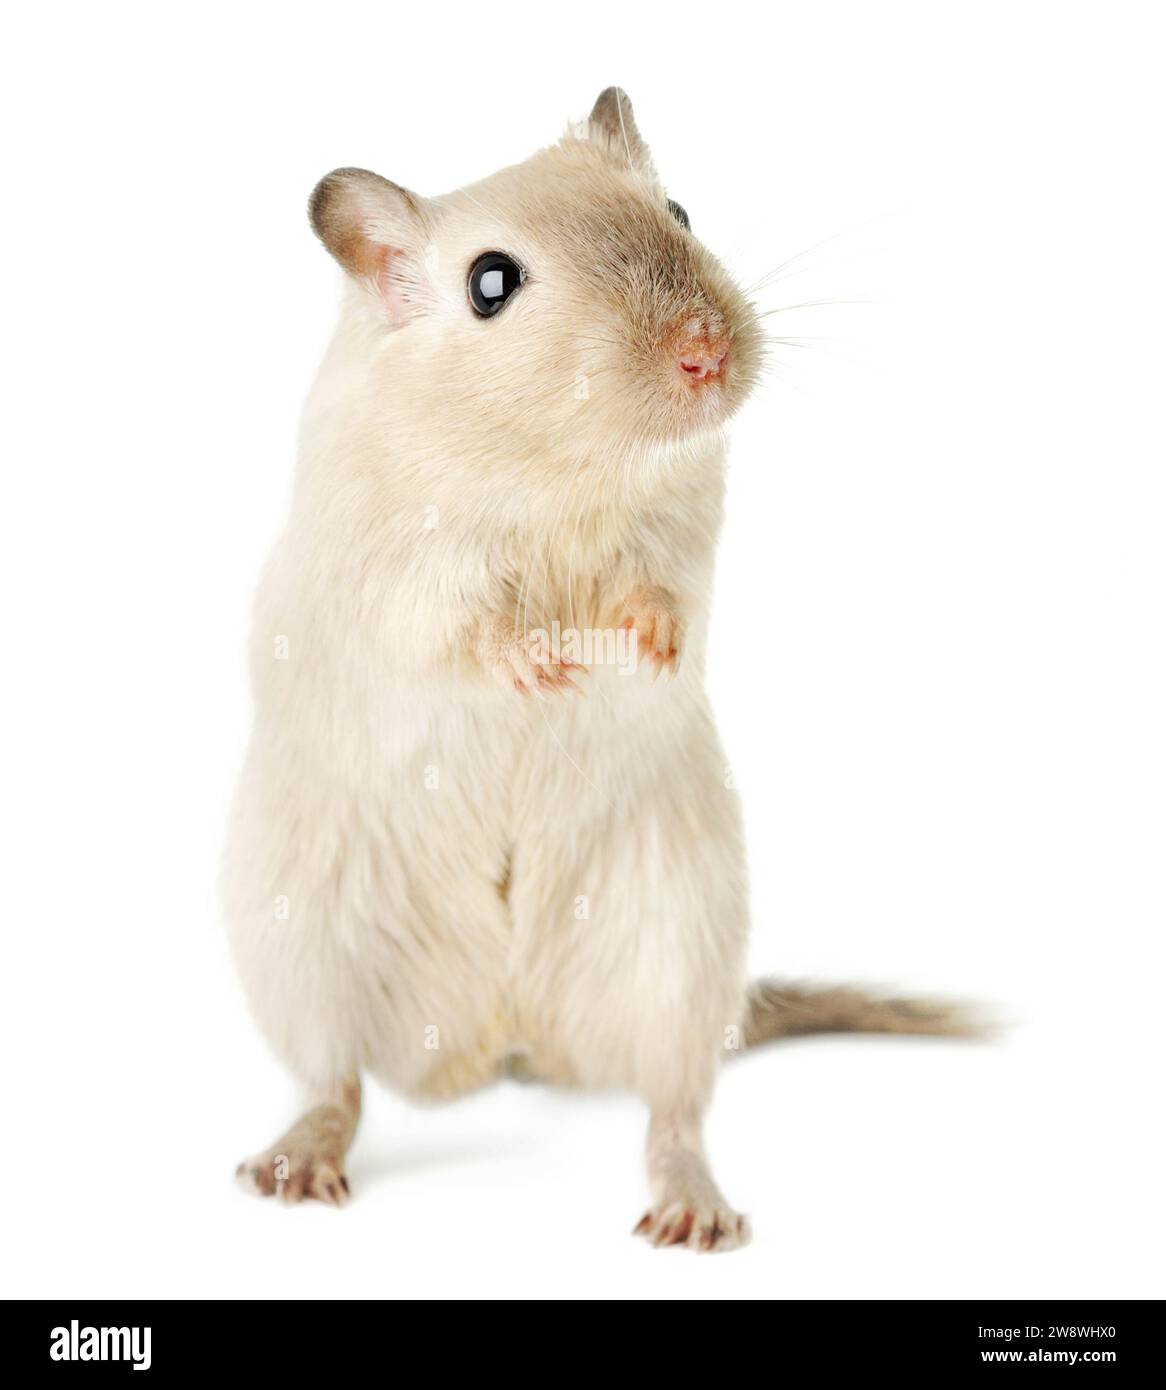 Cute beige gerbil standing on its hind legs, gazing upward with curiosity, isolated on white background Stock Photo